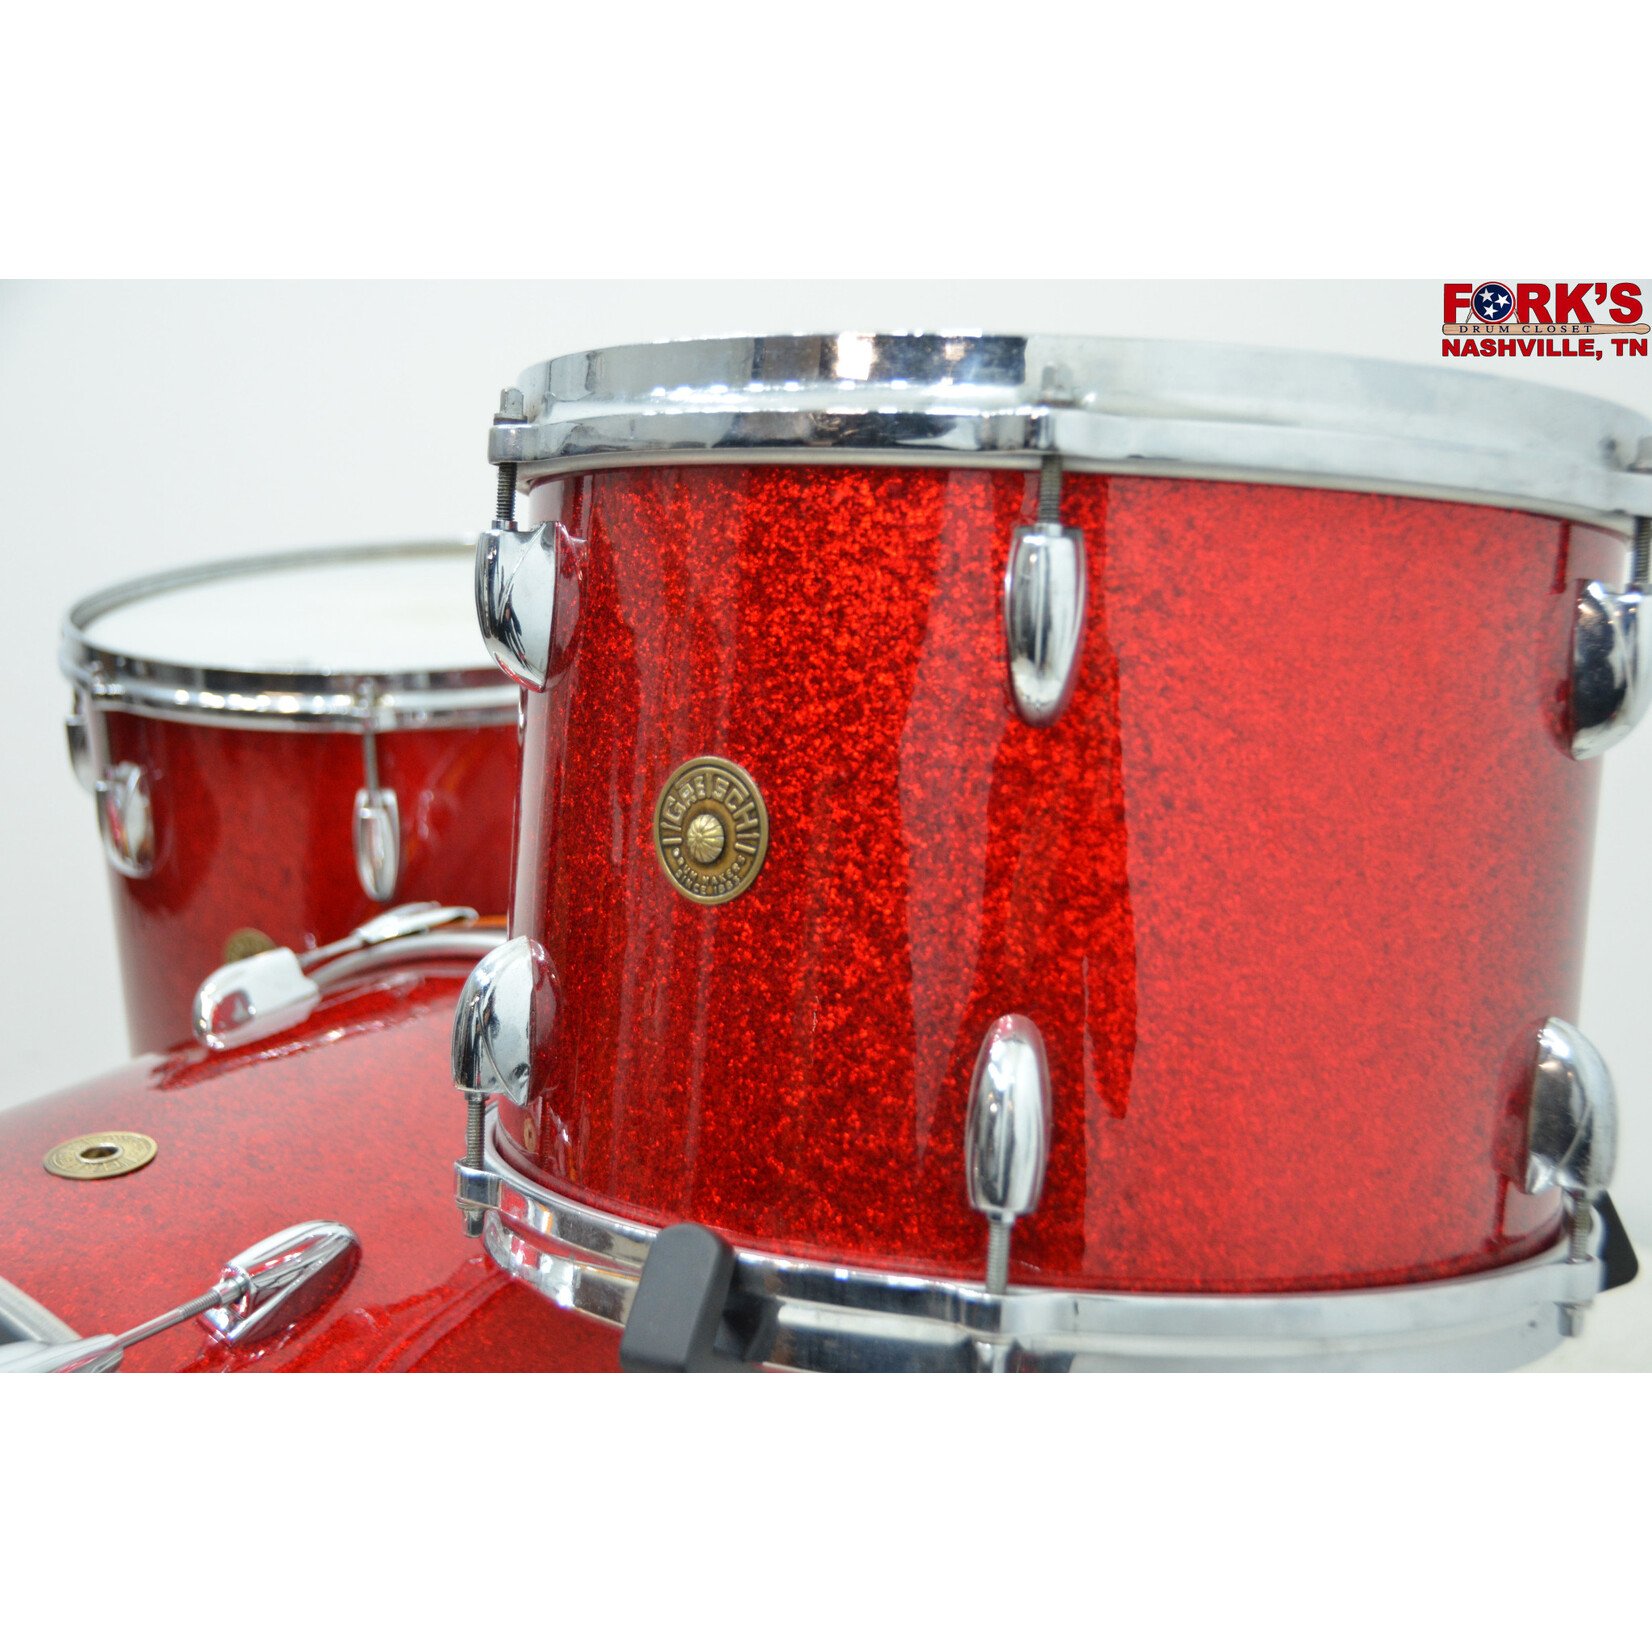 Gretsch Used 1950's/1960's Recovered Gretsch 3pc Drum Kit - "Red Sparkle"